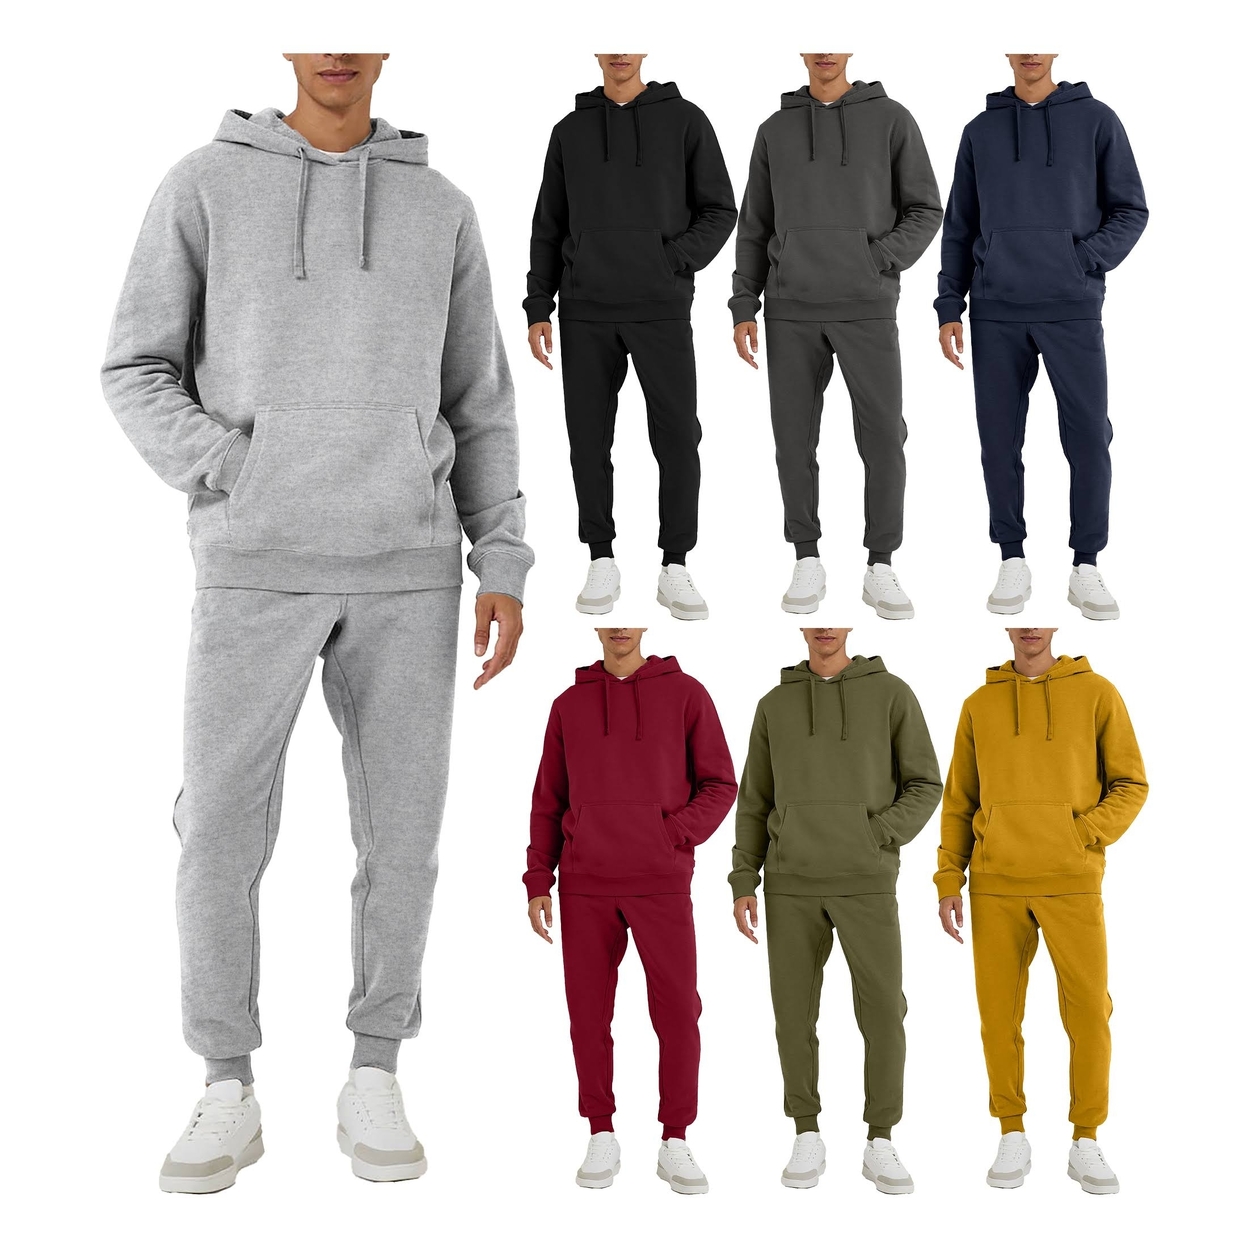 2-Pack: Men's Big & Tall Athletic Active Jogging Winter Warm Fleece Lined Pullover Tracksuit Set - Grey, X-large